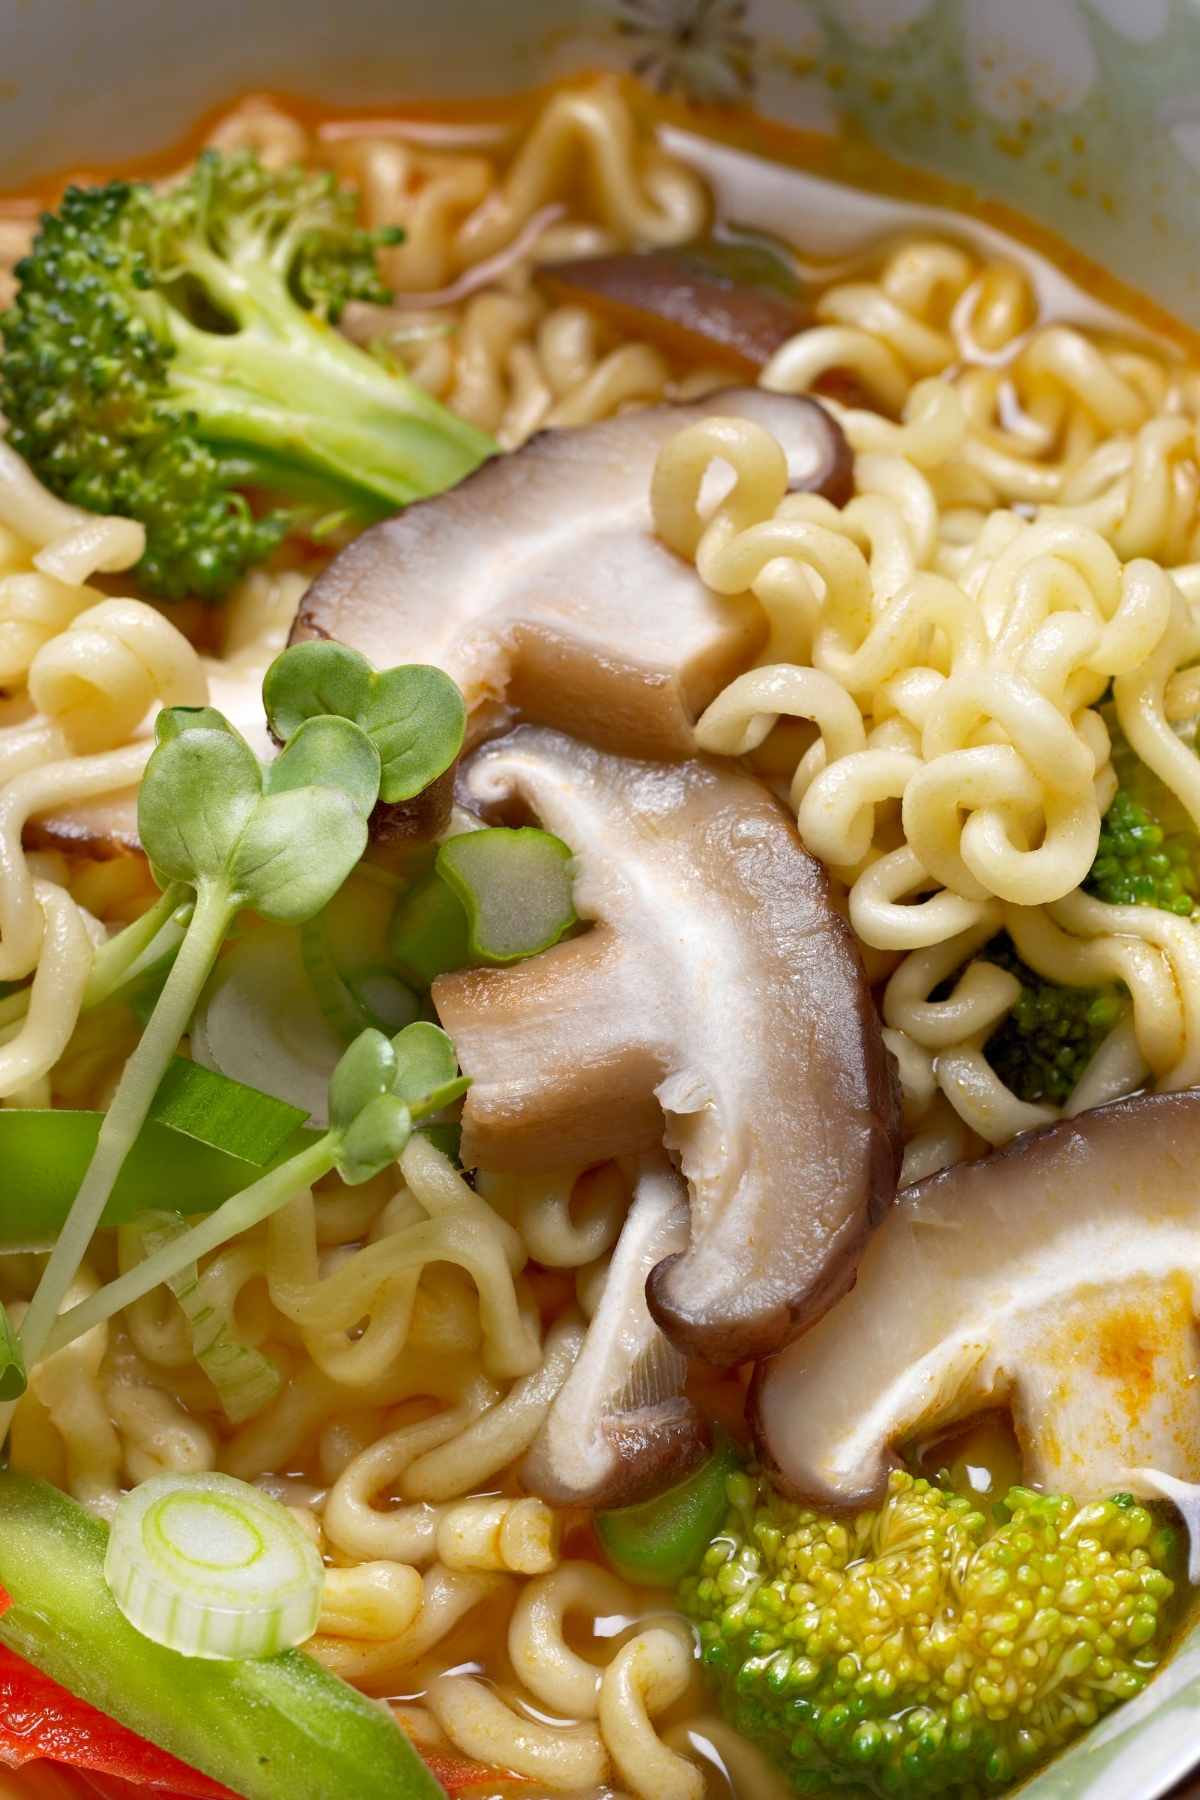 Chinese Ramen is a super easy dish to make. It can be customized to suit your tastes and is ready to eat in minutes.